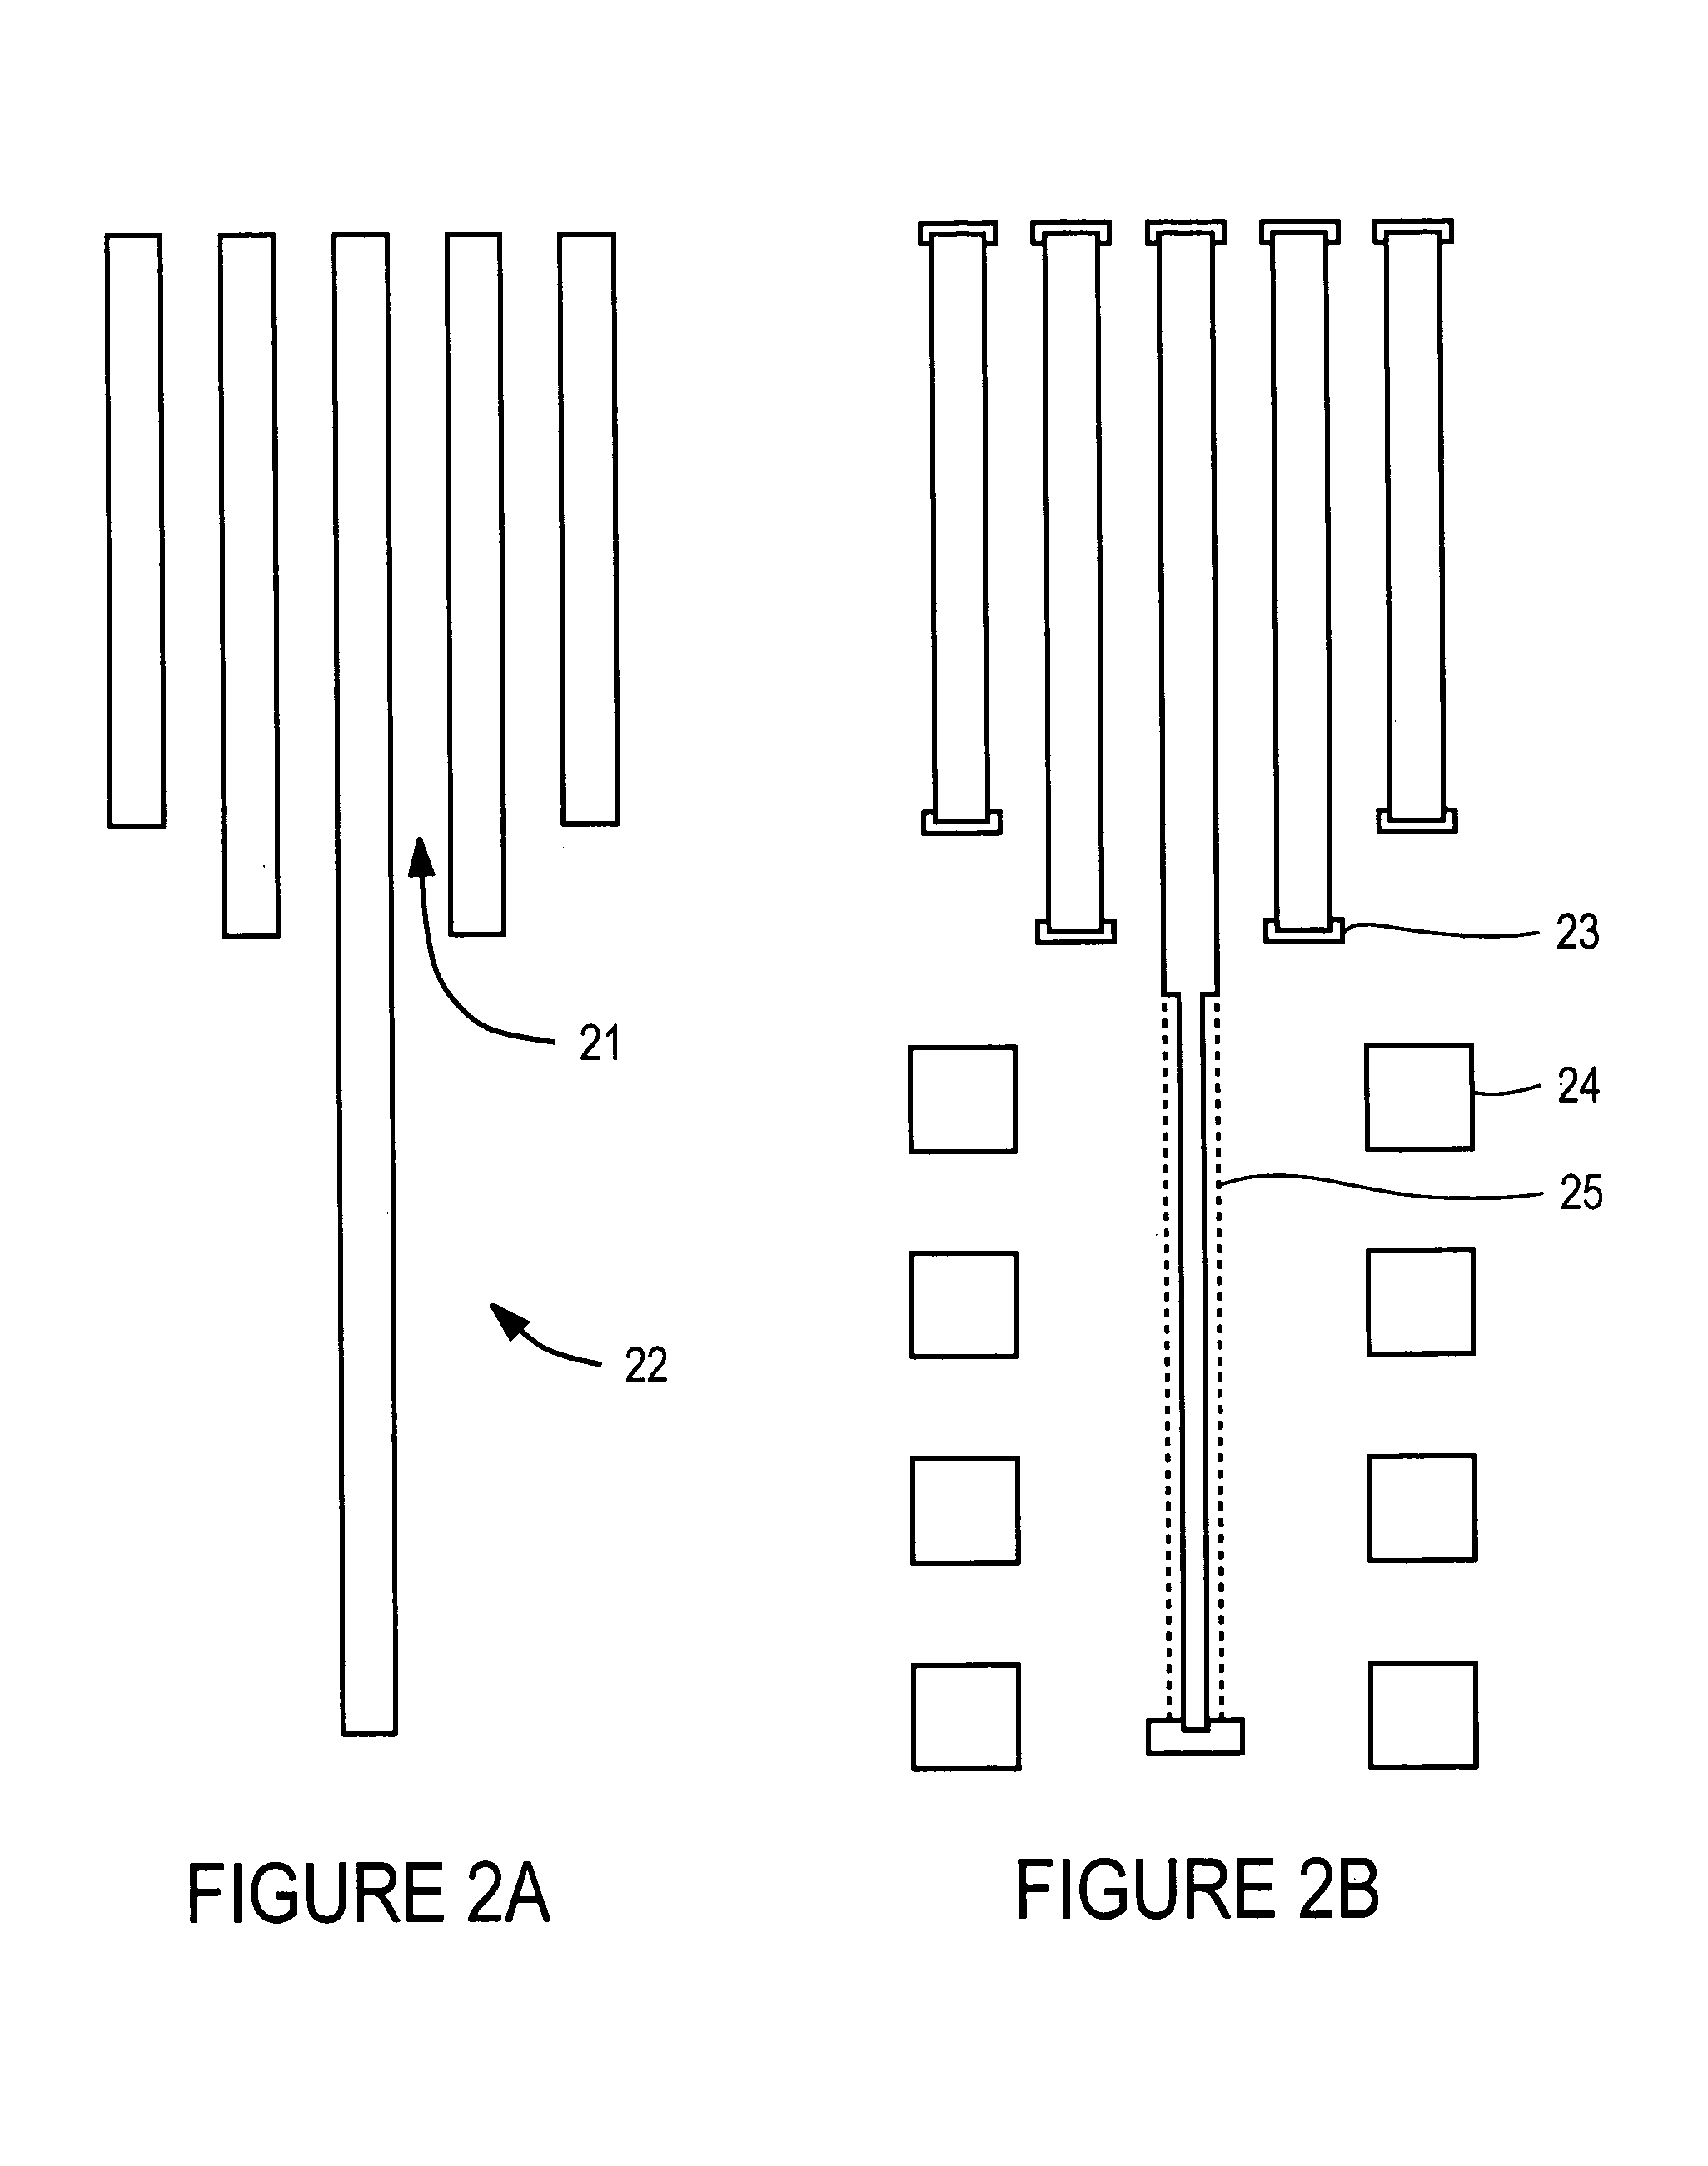 Method and platform for integrated physical verifications and manufacturing enhancements